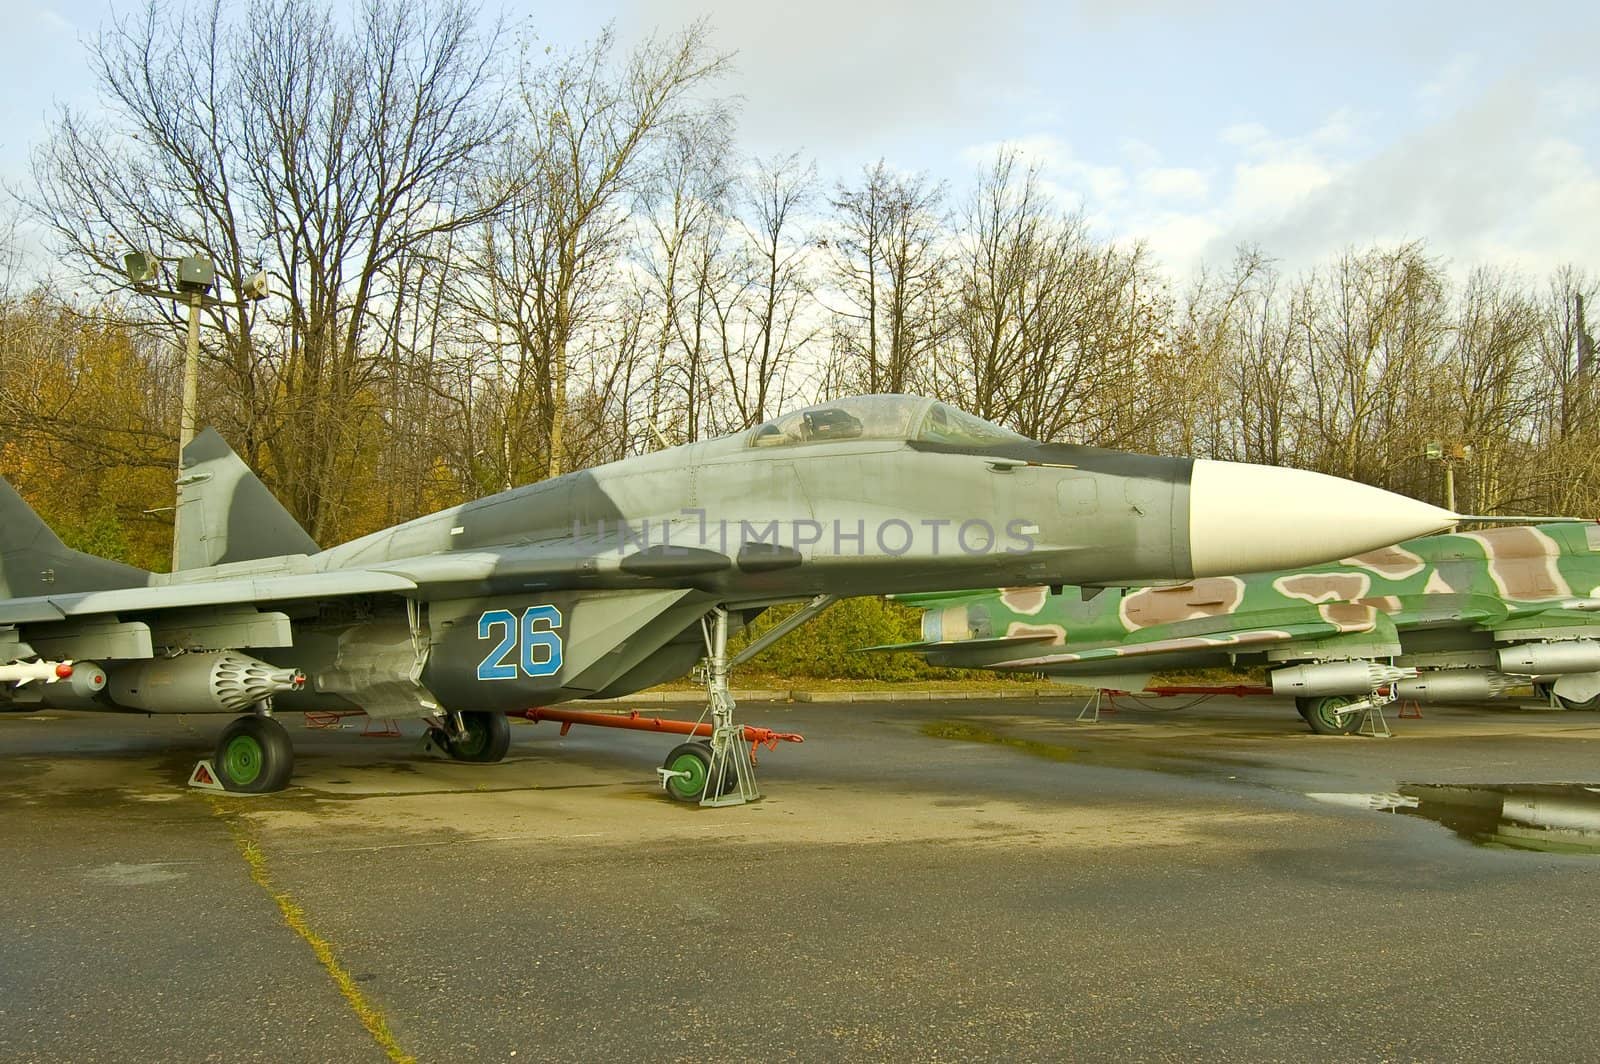 The Plane Was Developed In 1977 And Was Produced In Several Modifications.